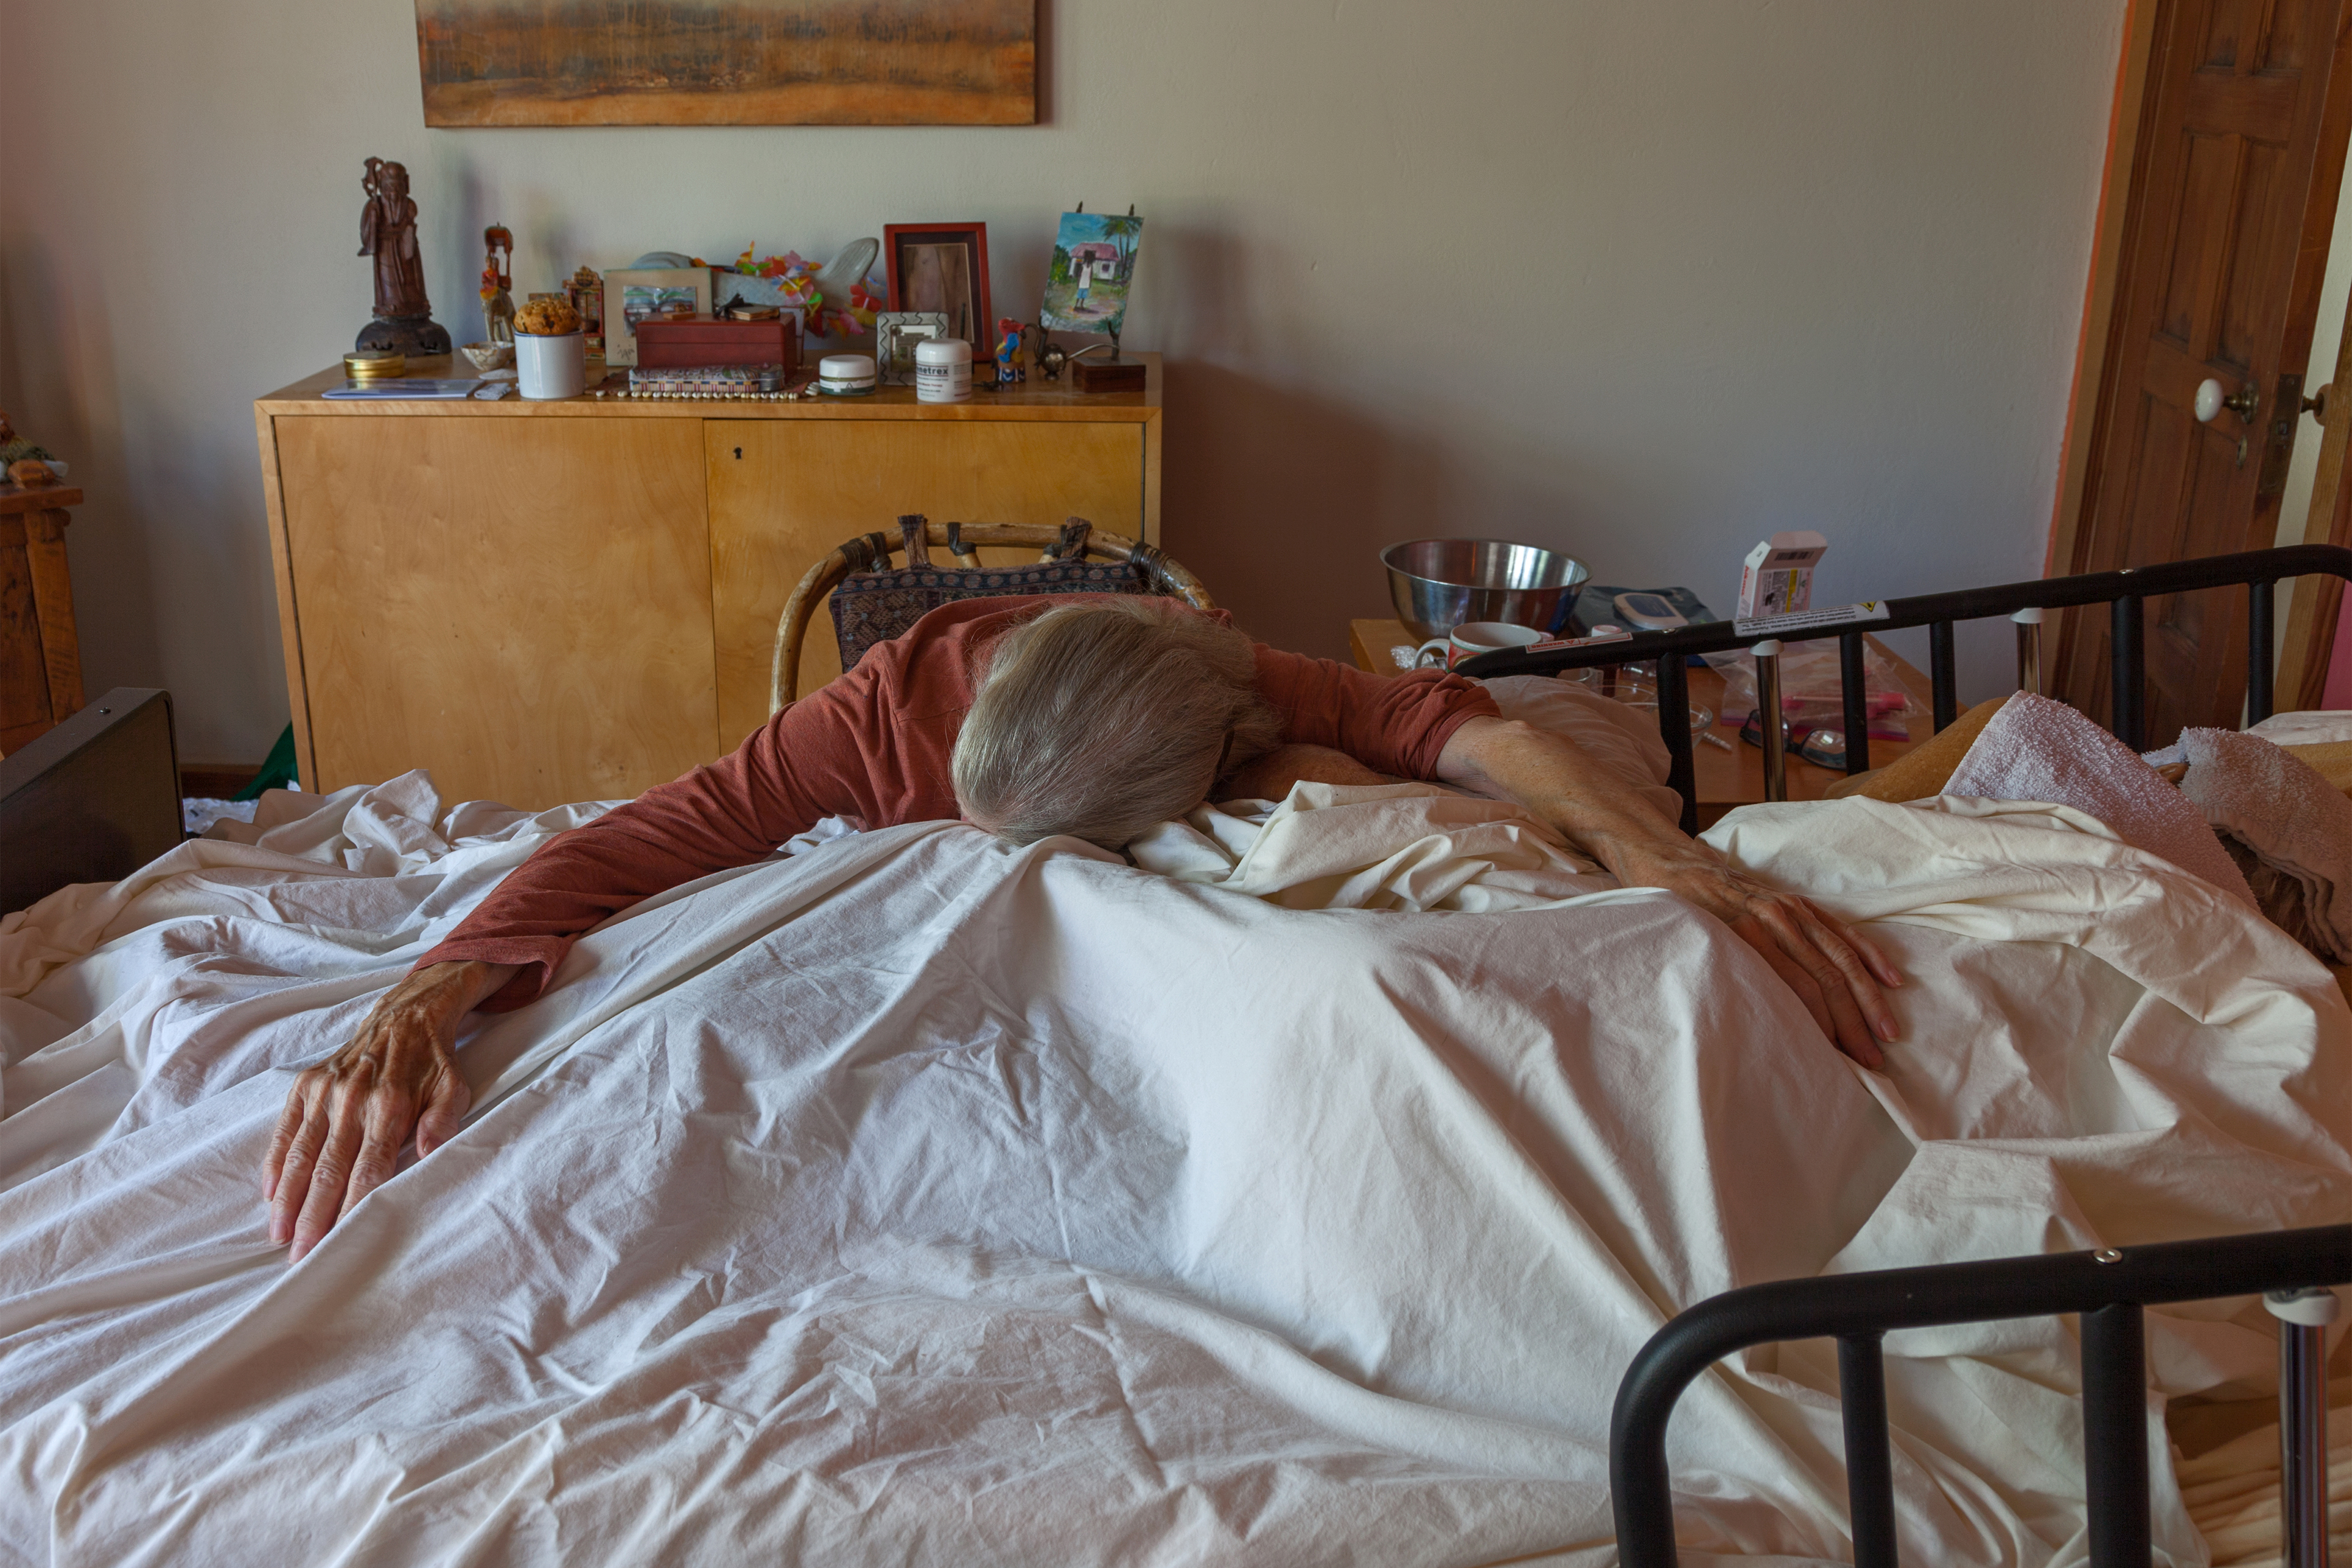 A photo shows Marna Clarke resting her head on her partner's deathbed.